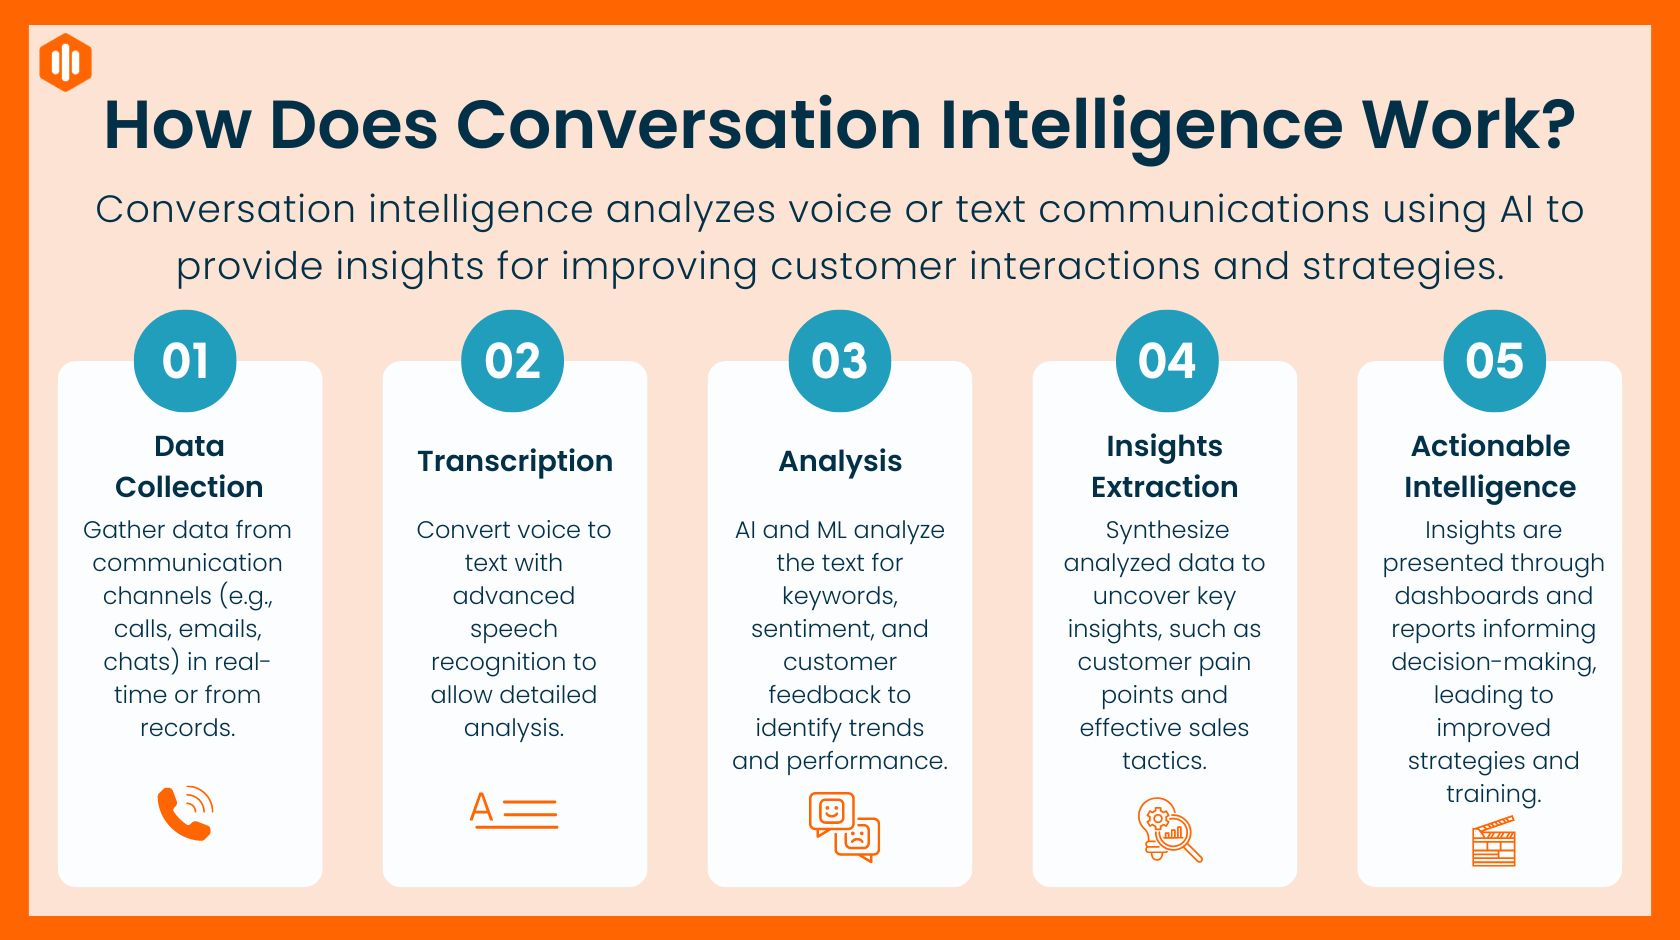 How does Conversation Intelligence work?